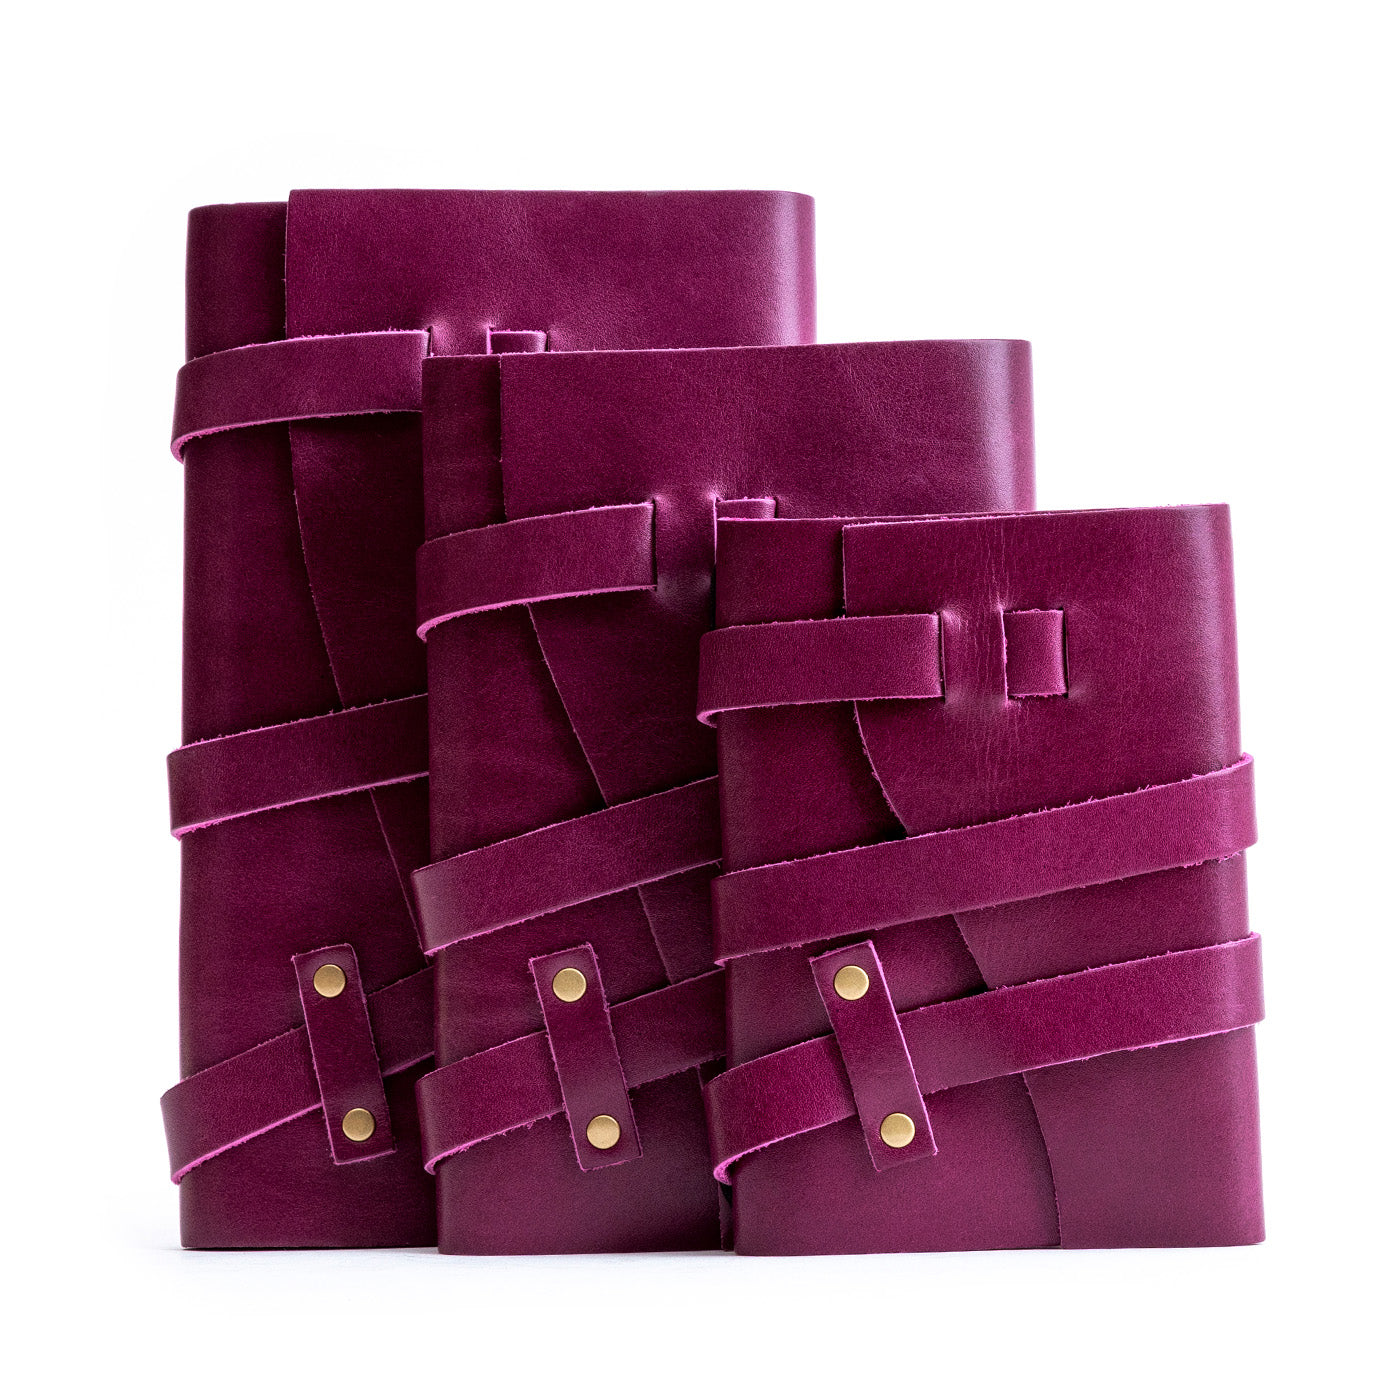 All Color: Boysenberry